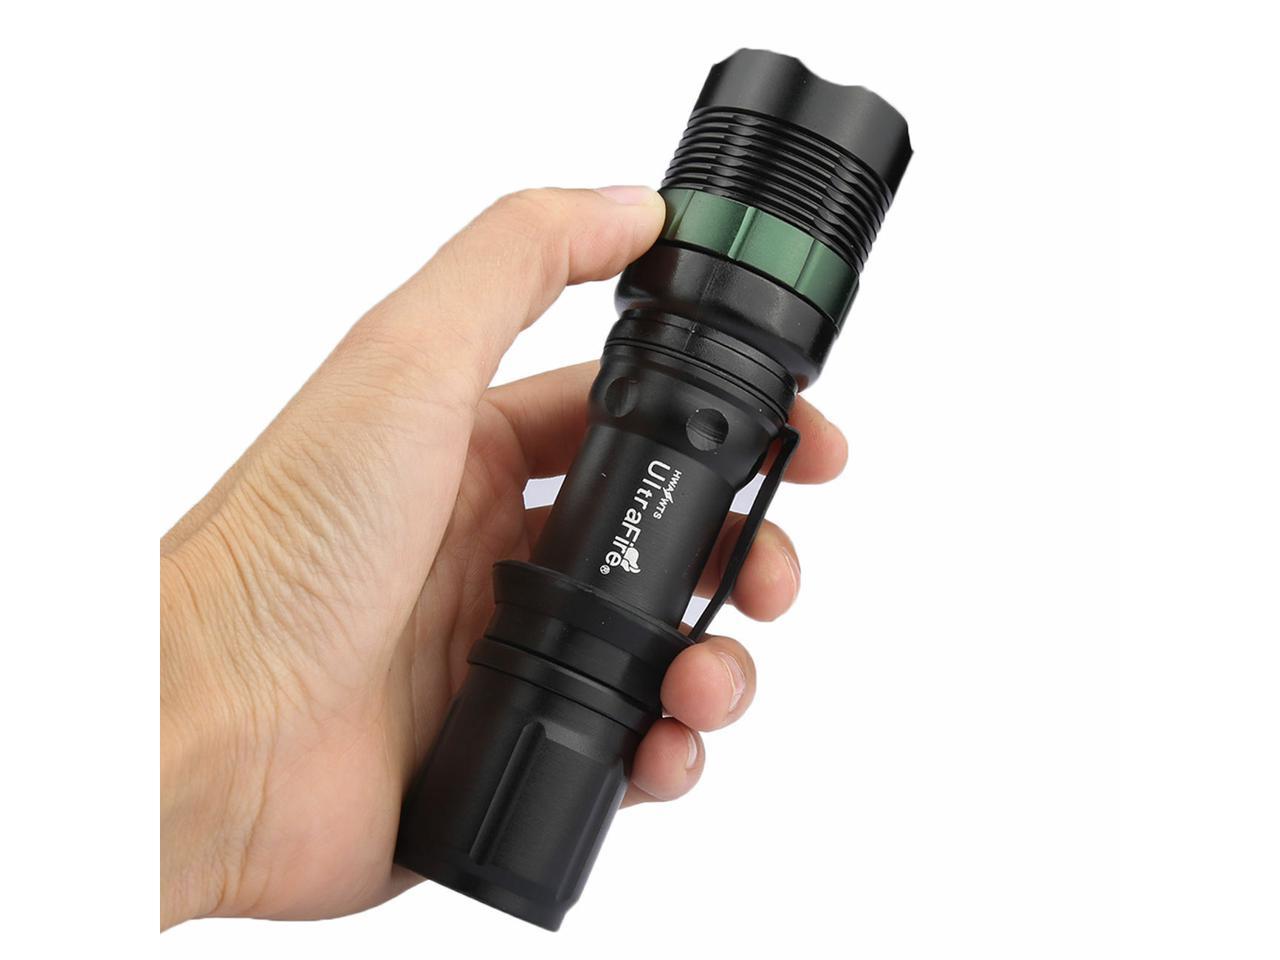 Brightest 150000LM LED Flashlight USB Rechargeable Hunting Lamp Searchlight